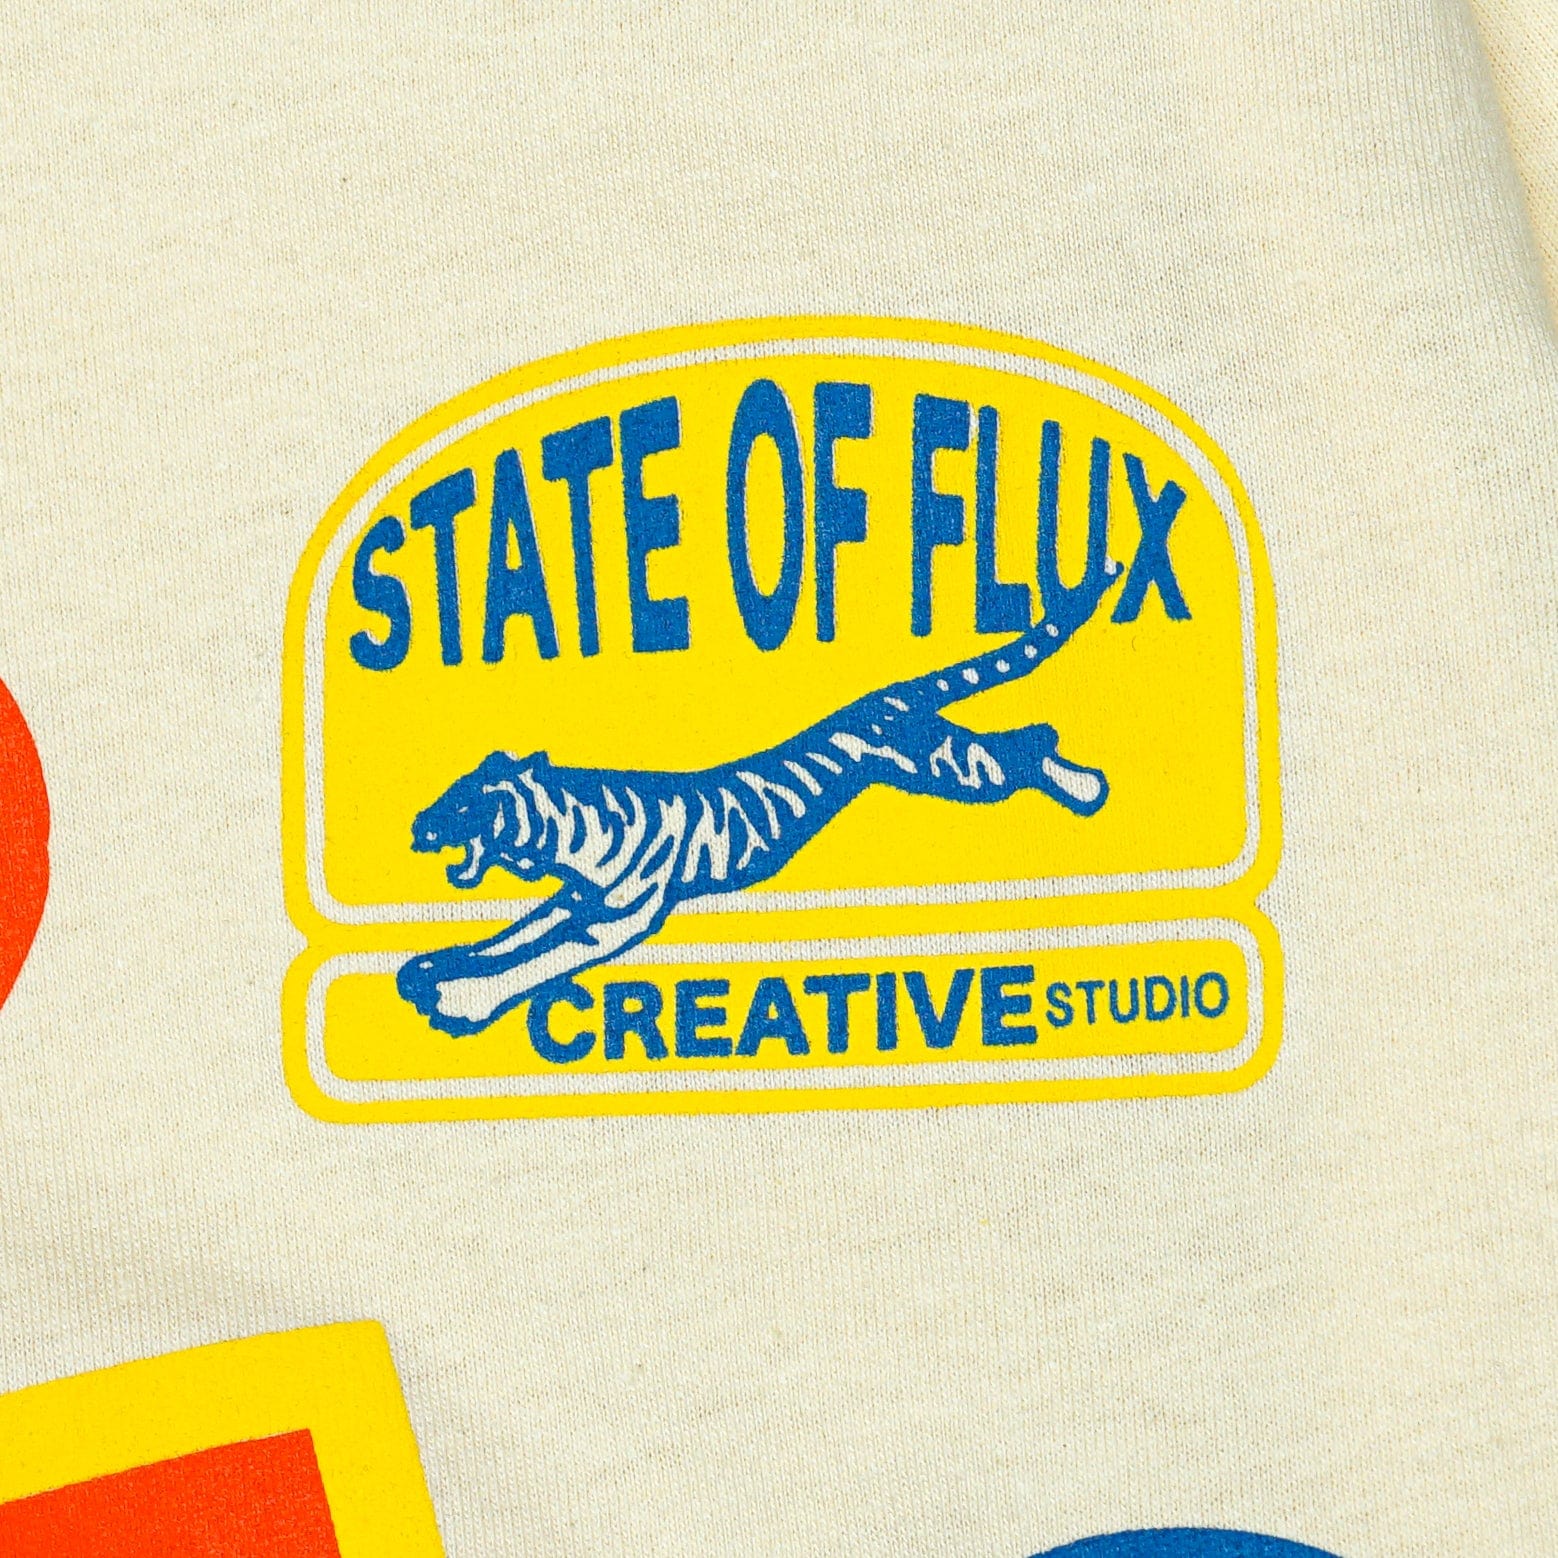 SOF Logos Tee in cream - State Of Flux - State Of Flux